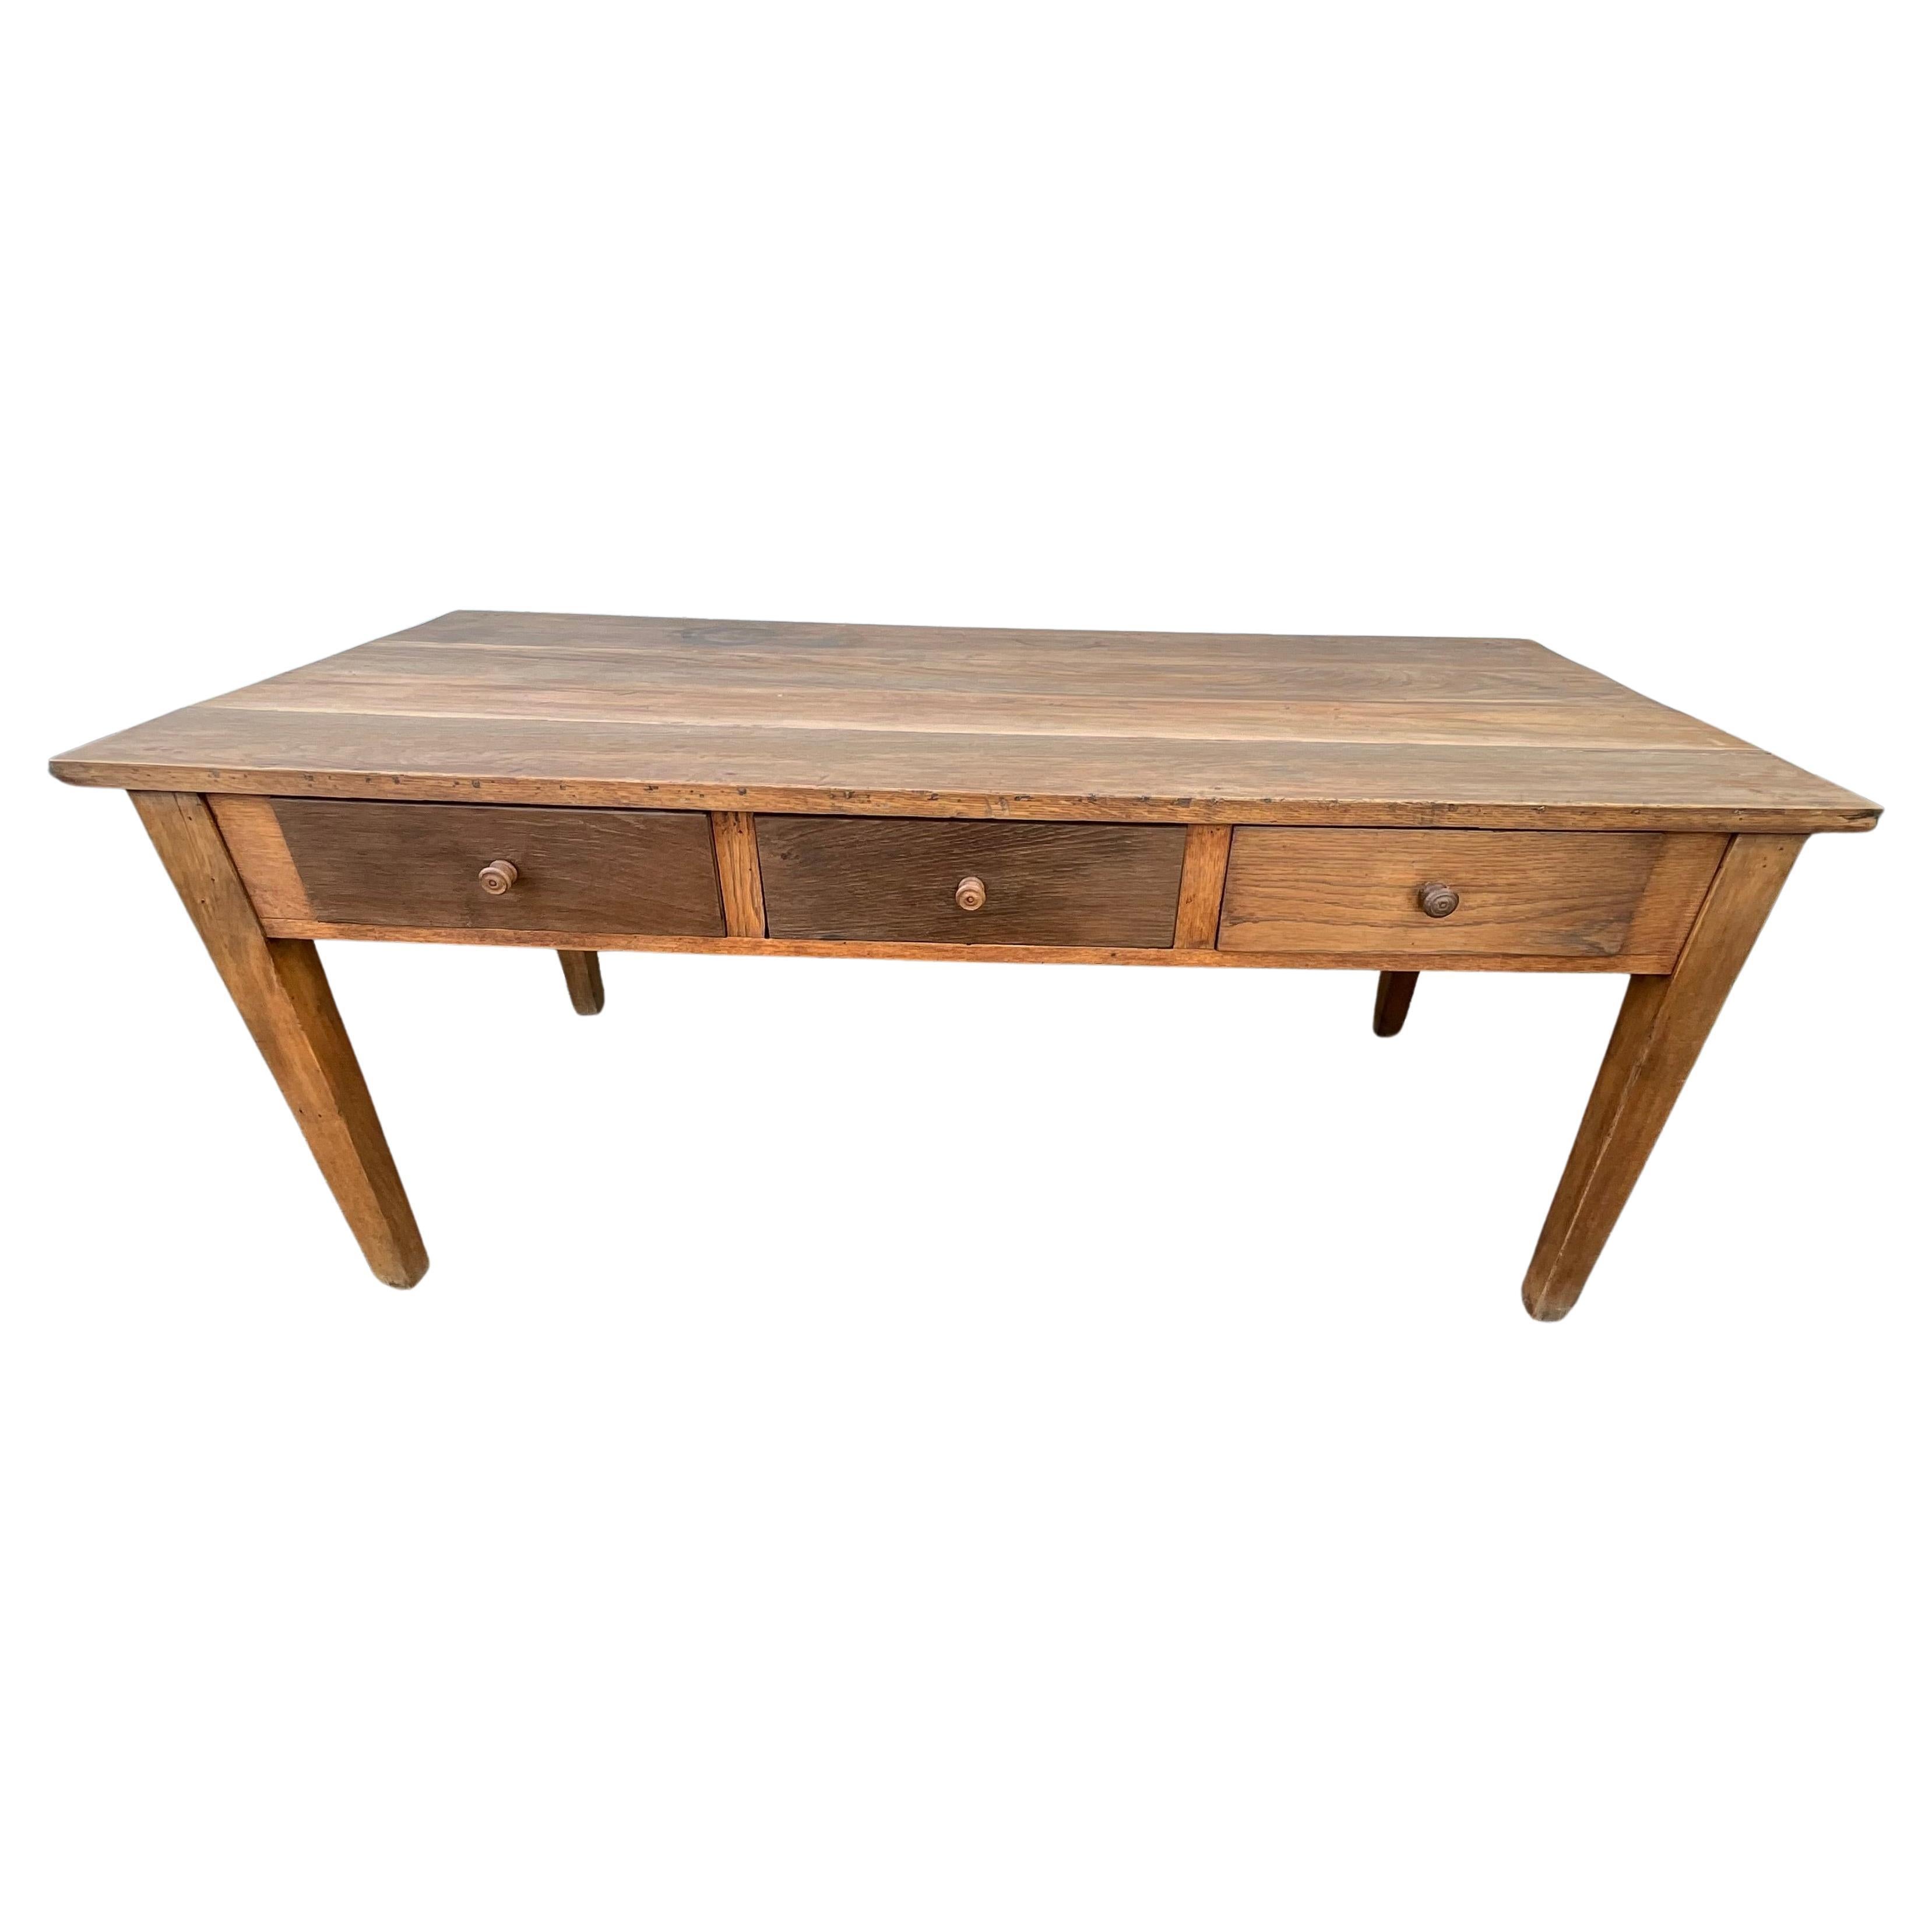 French monastery table in solid oak